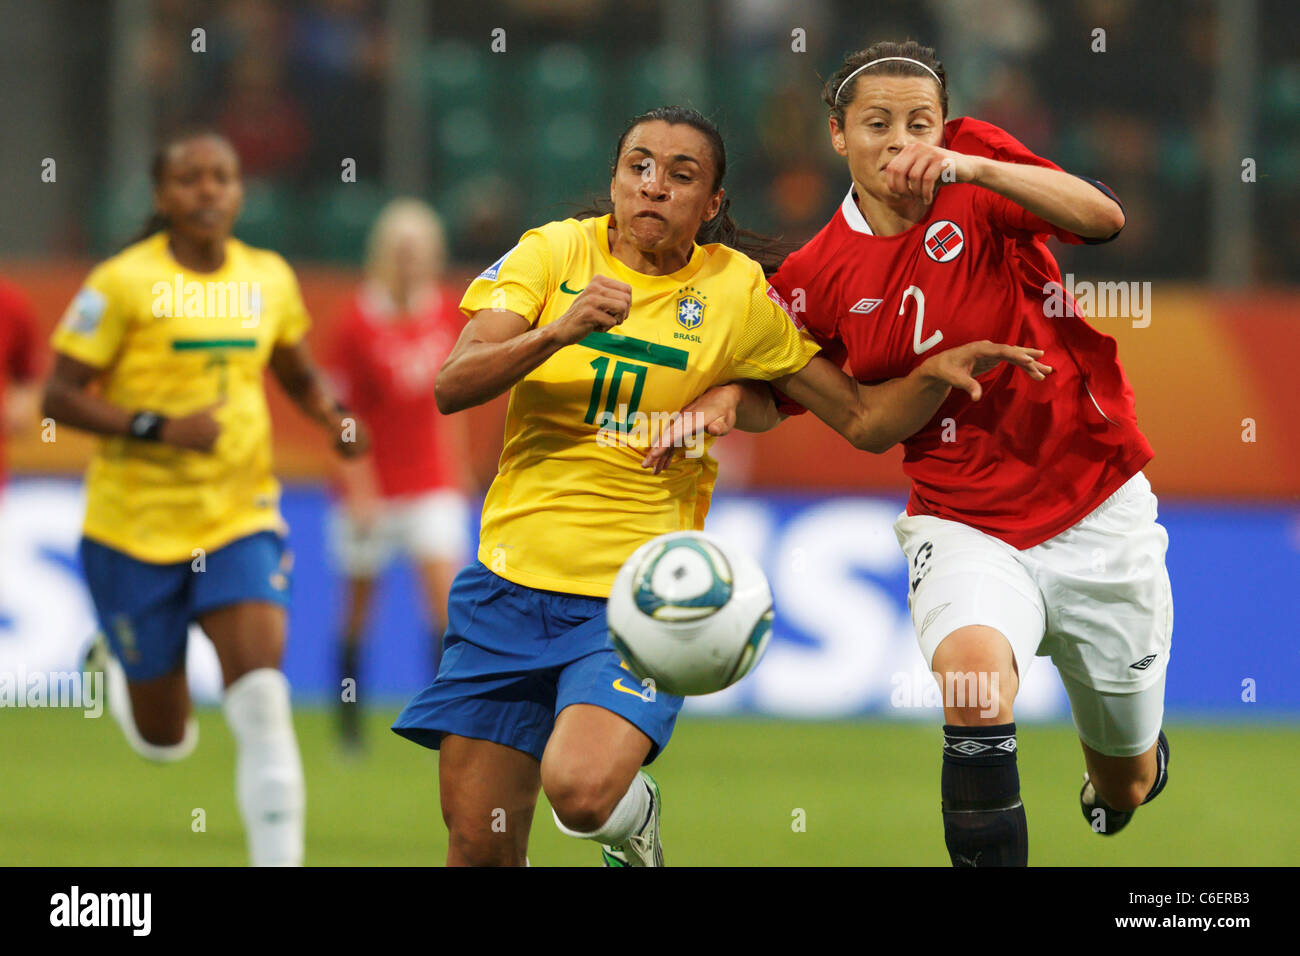 Marta of Brazil (10) and Nora Holstad Berge of Norway (2) race for the ball during a  Women's World Cup soccer match July 3 2011 Stock Photo